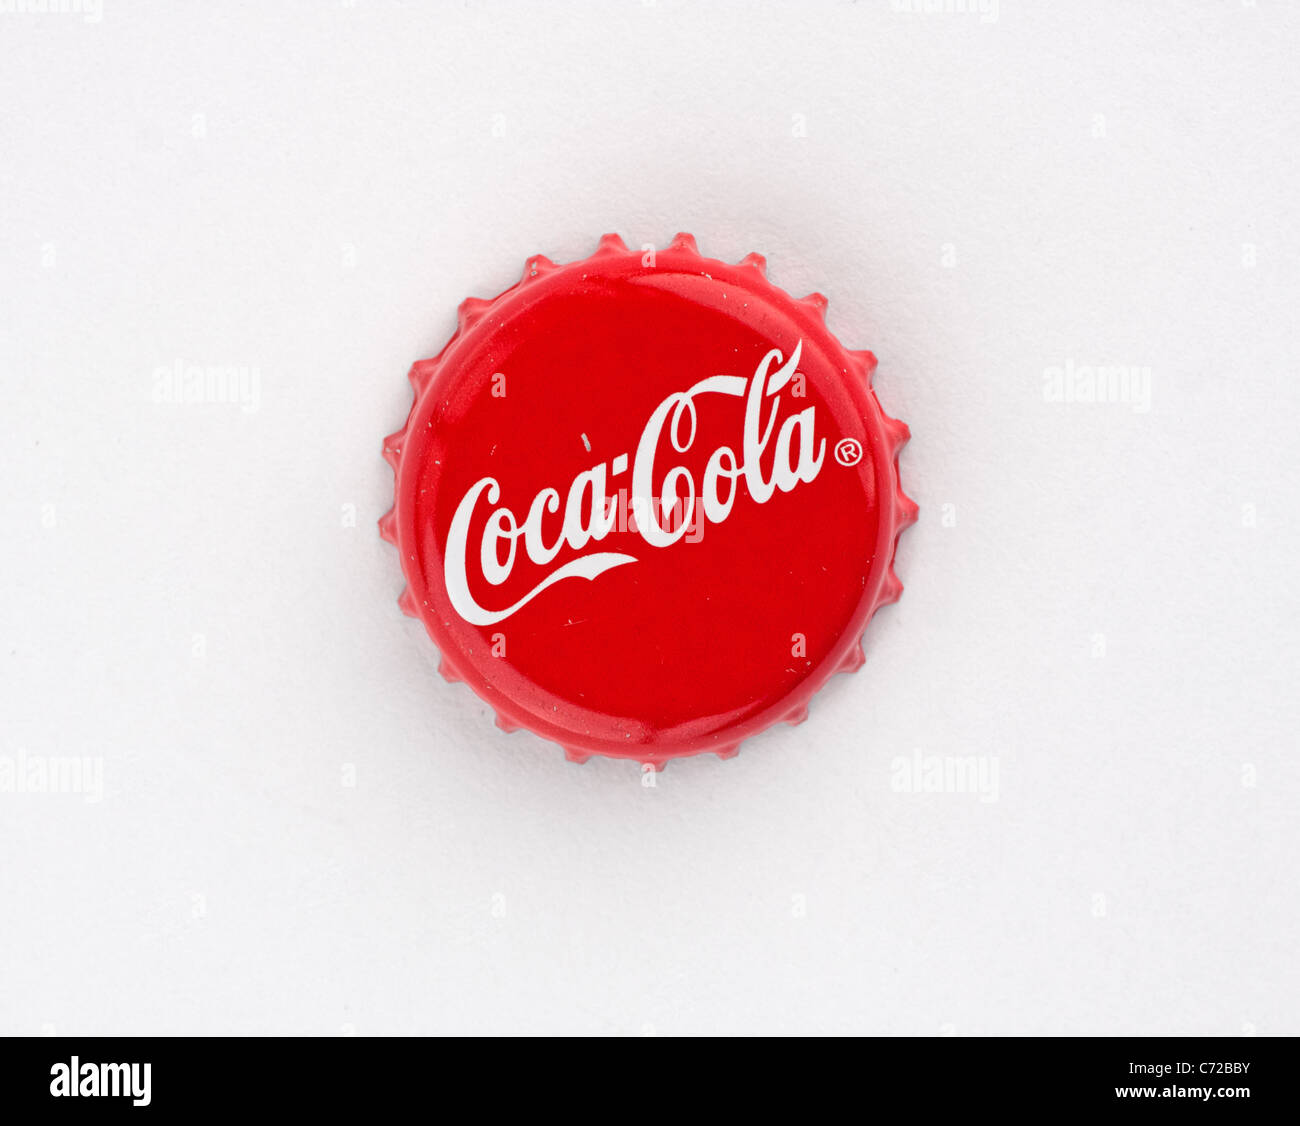 Muenster, Germany - September 10, 2011: Picture shows coca cola bottle cap on red background. Stock Photo